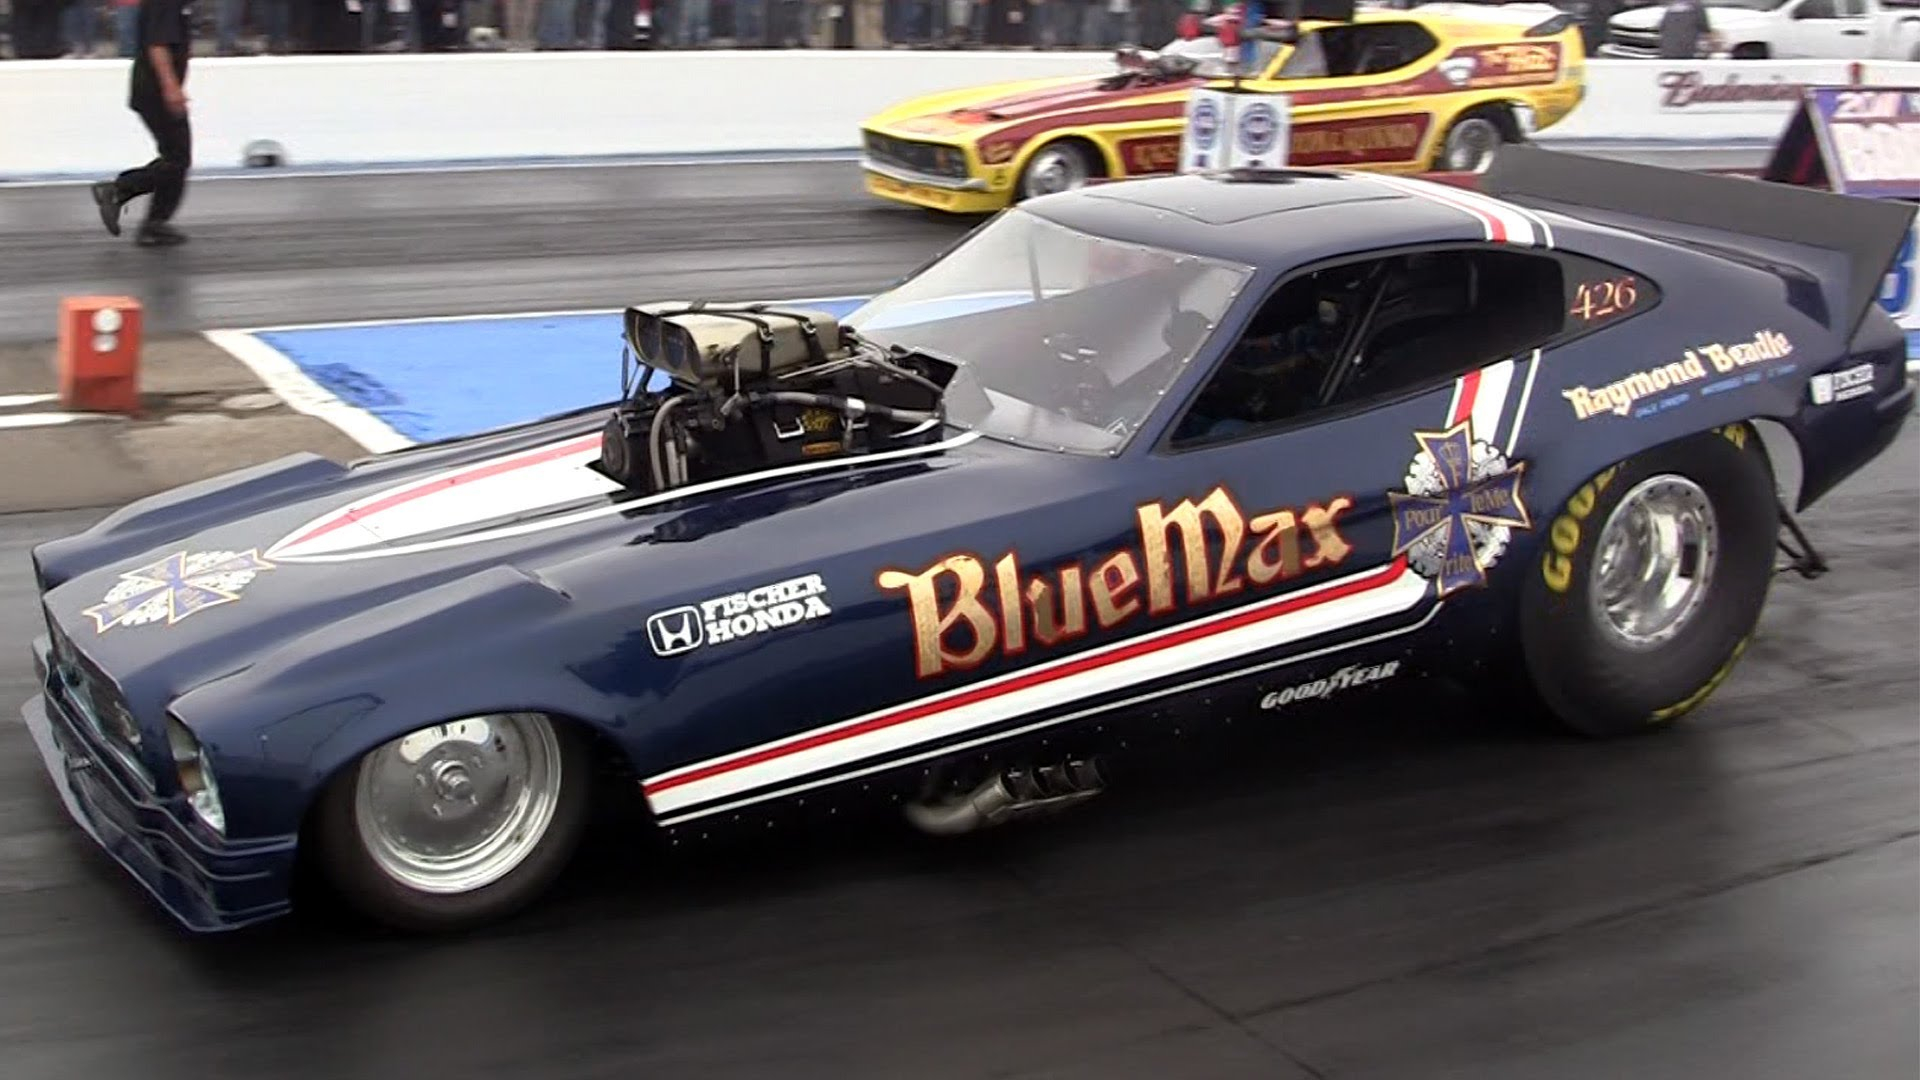 1920x1080 funnycar, Funny, Nhra, Drag, Racing, Race, Hot, Rod, Rods, Blue, Max, Ford, Mustang Wallpapers HD / Desktop and Mobile Backgrounds